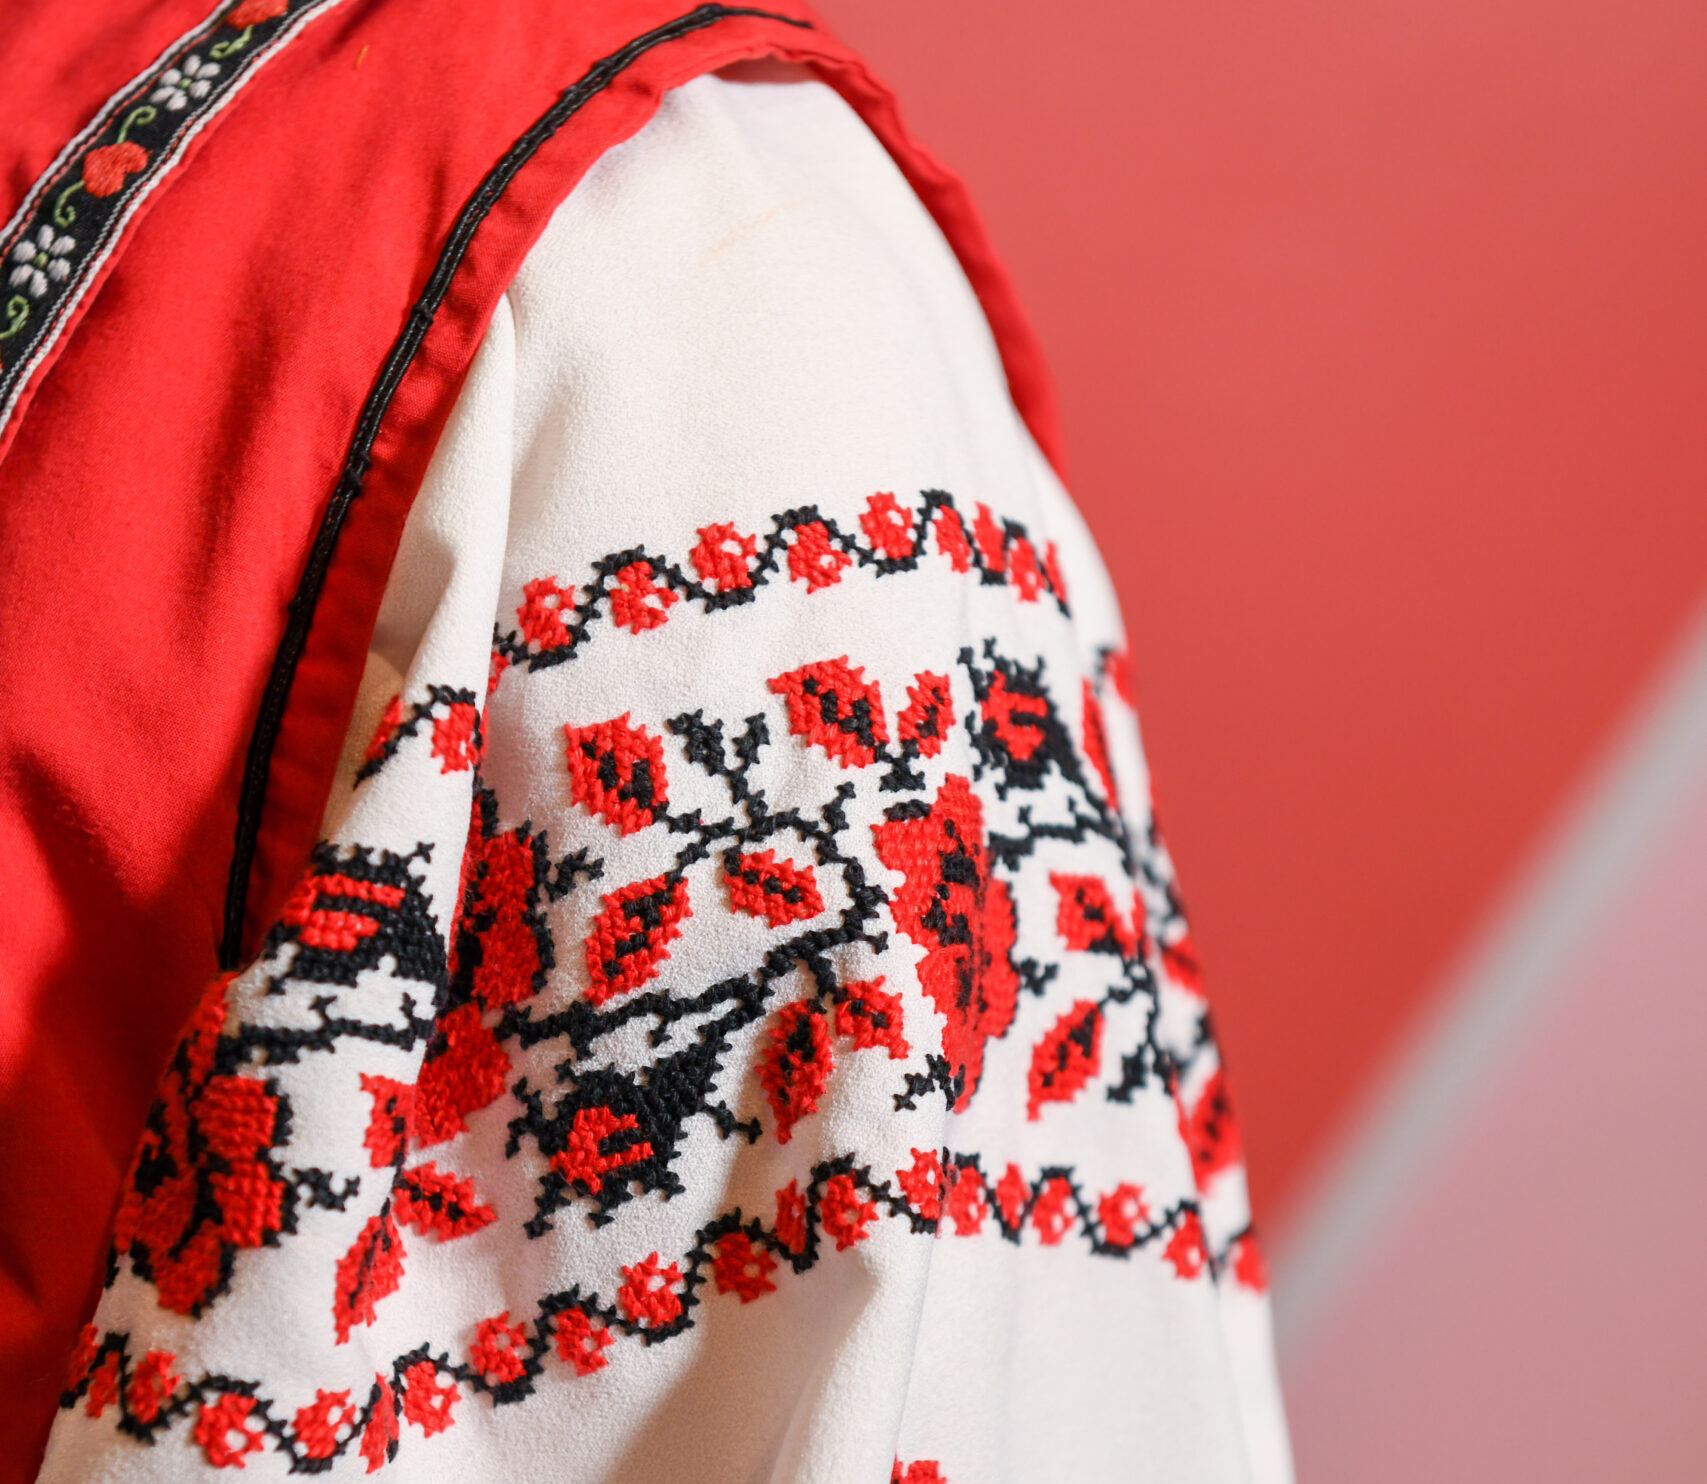 Red and black embroidery detail on the shoulder of a dancer's white shirt.